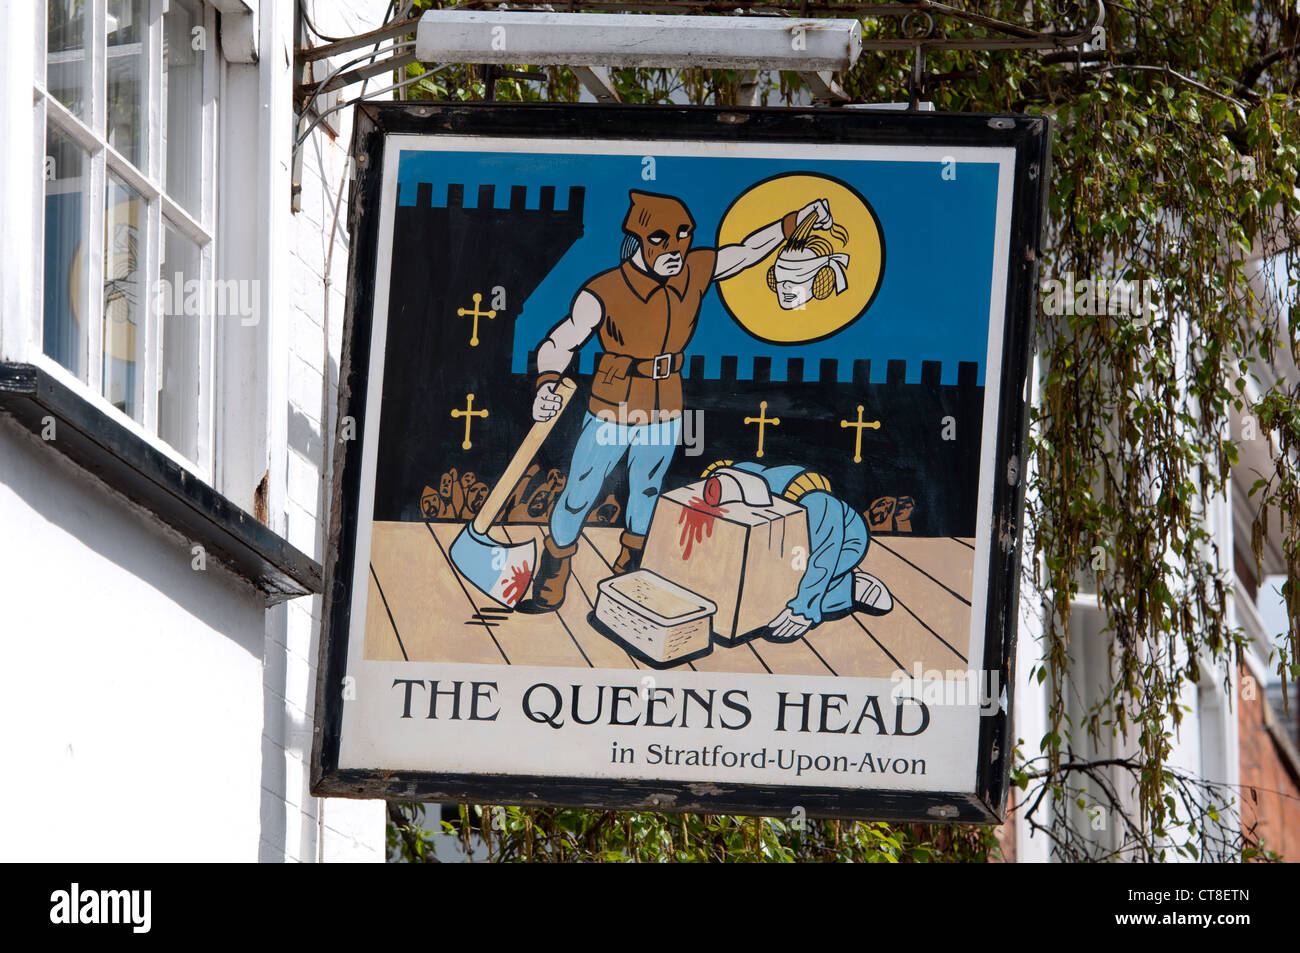 The Queens Head pub sign, Stratford-upon-Avon, UK Stock Photo